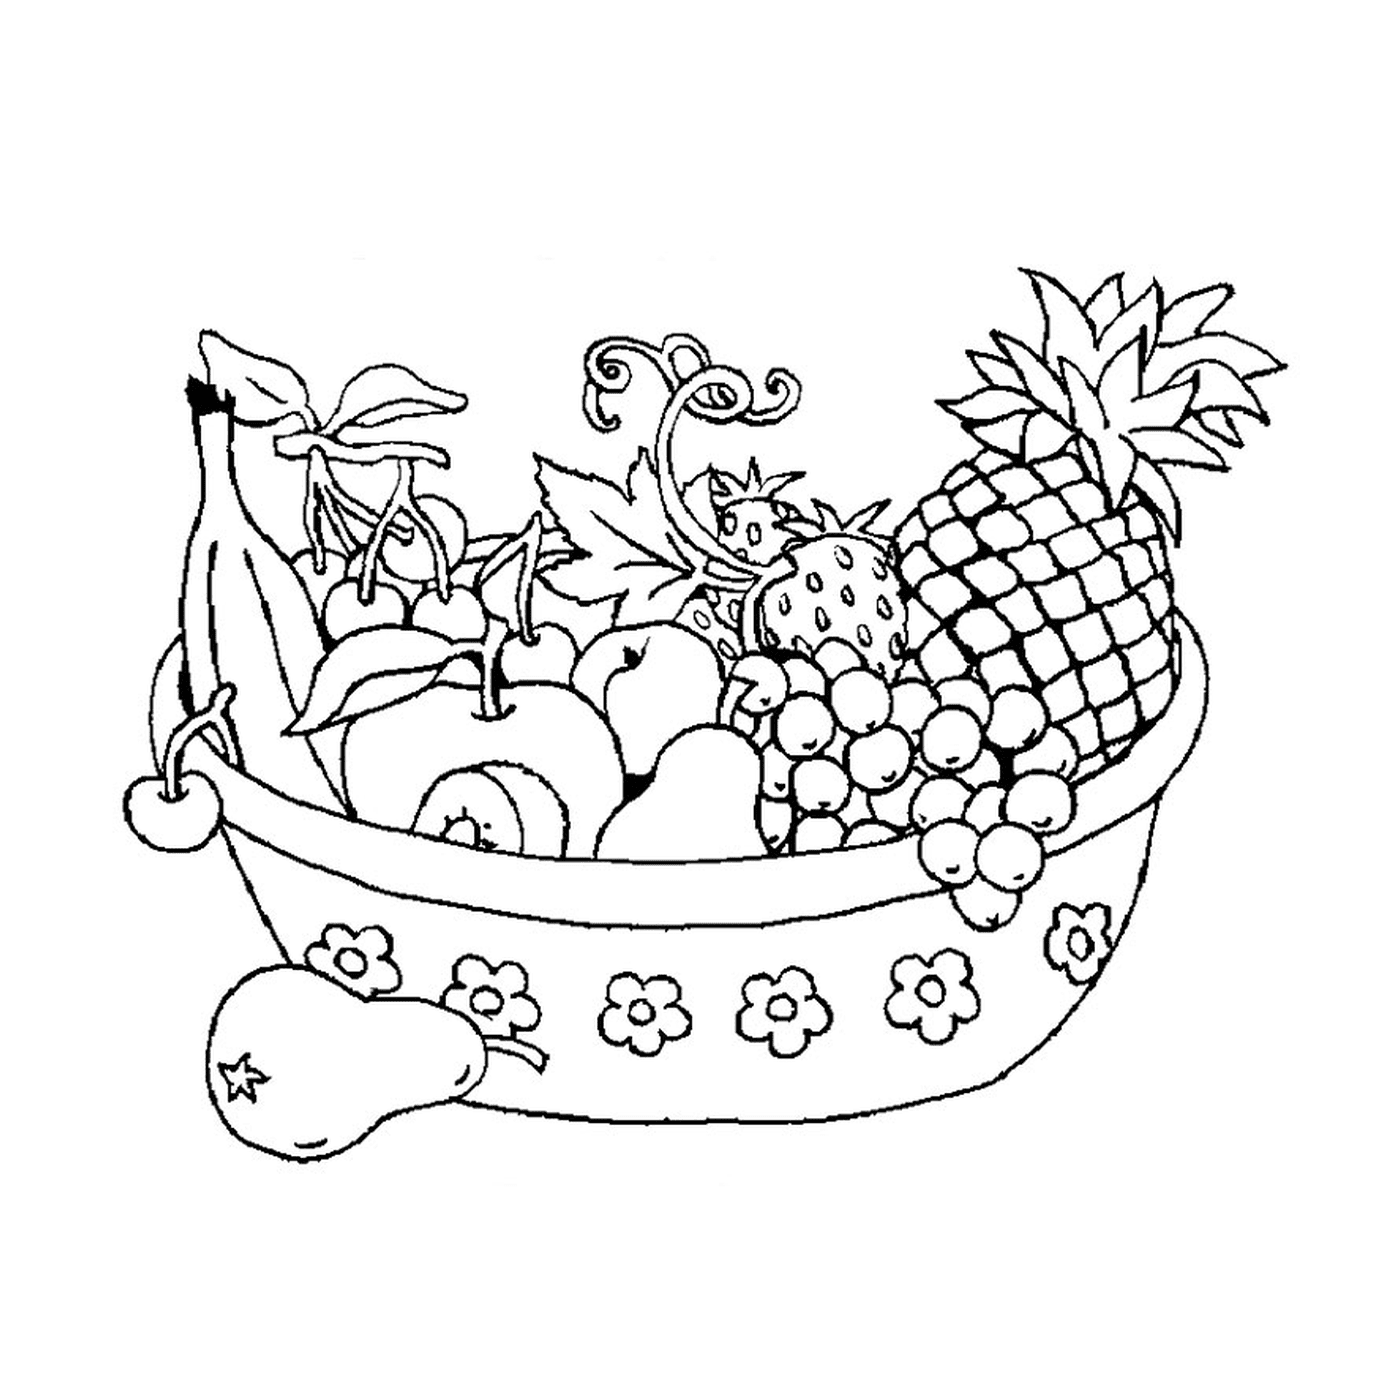  bowl filled with fruit 